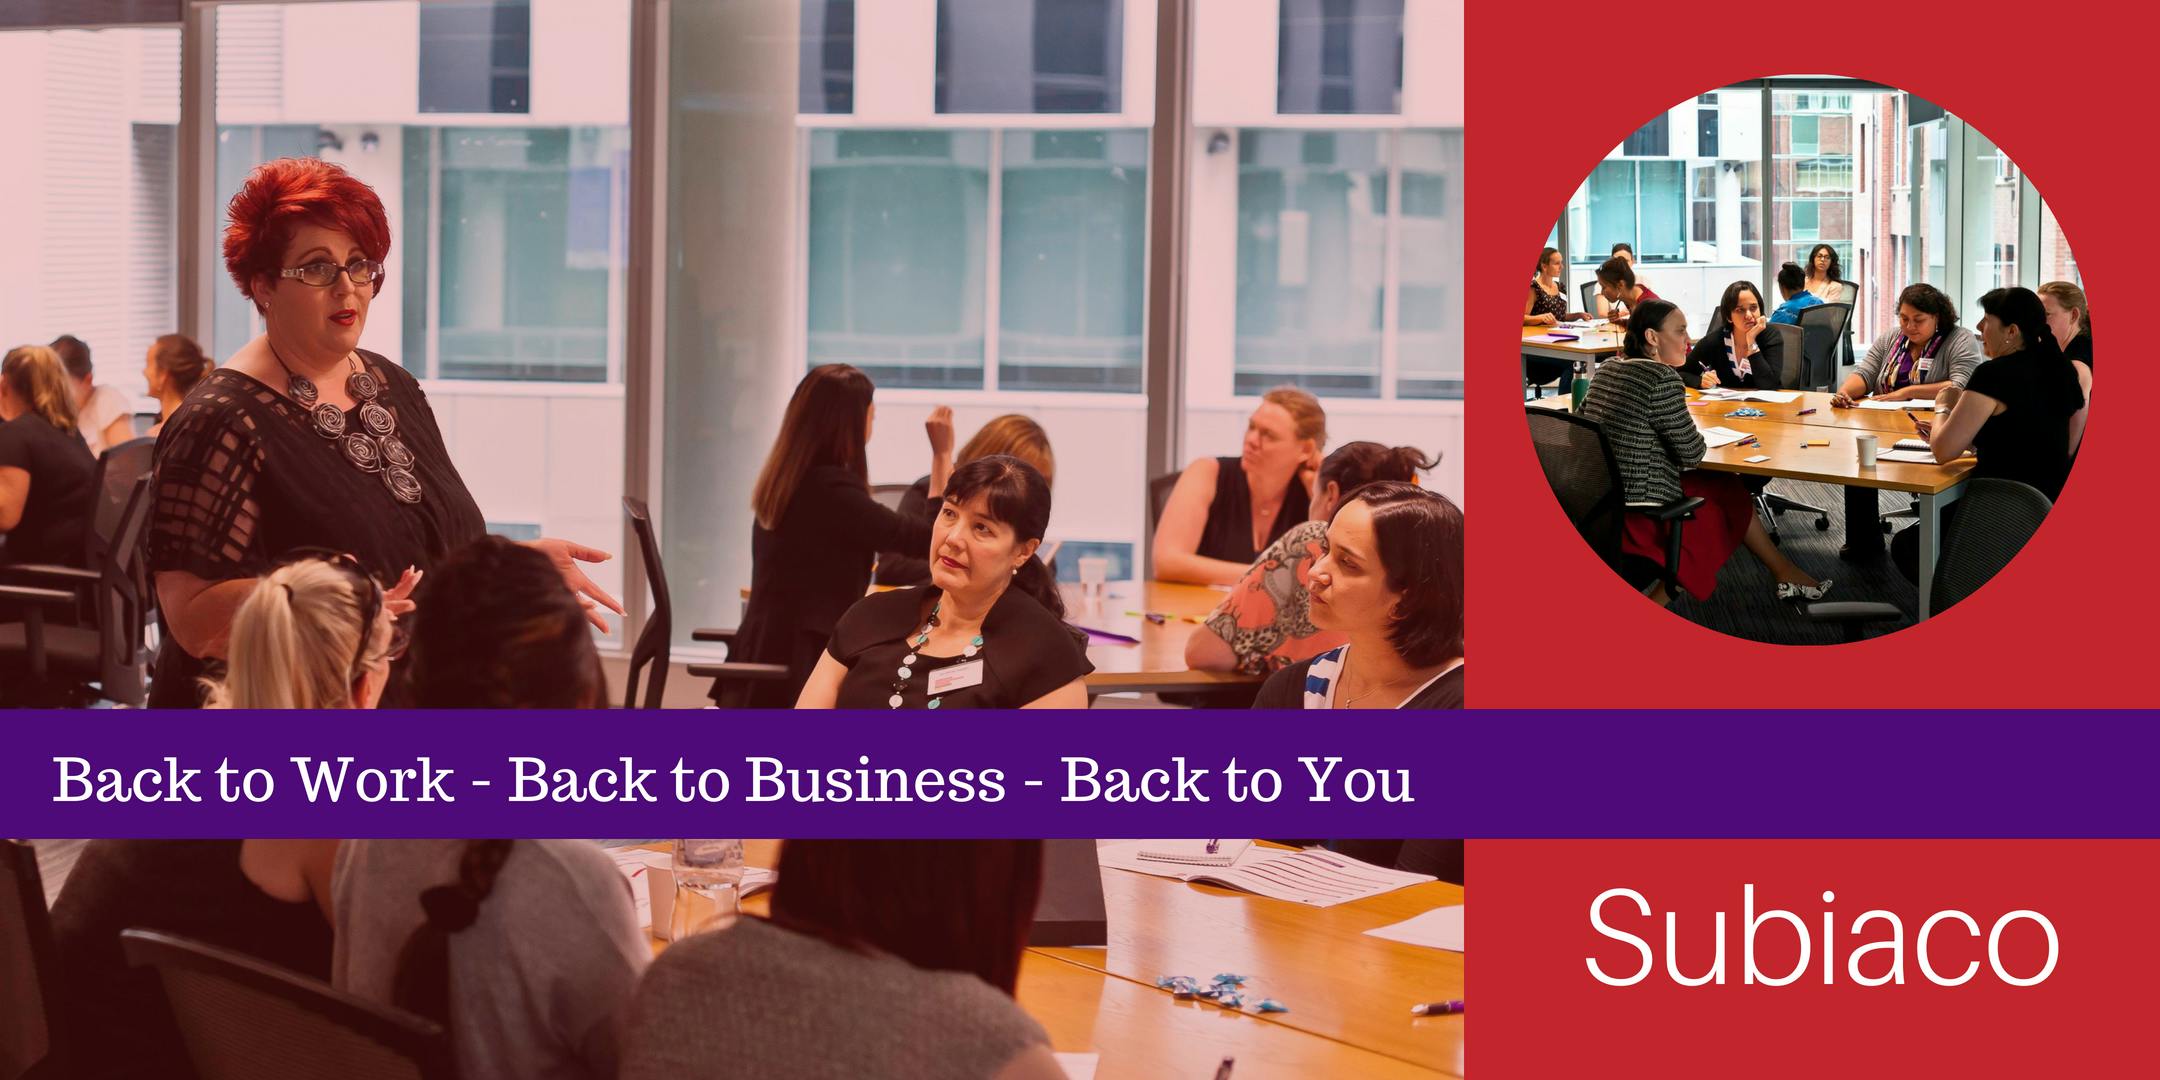 Back to Work - Back to Business - Back to You (2 hour workshop - Subiaco)